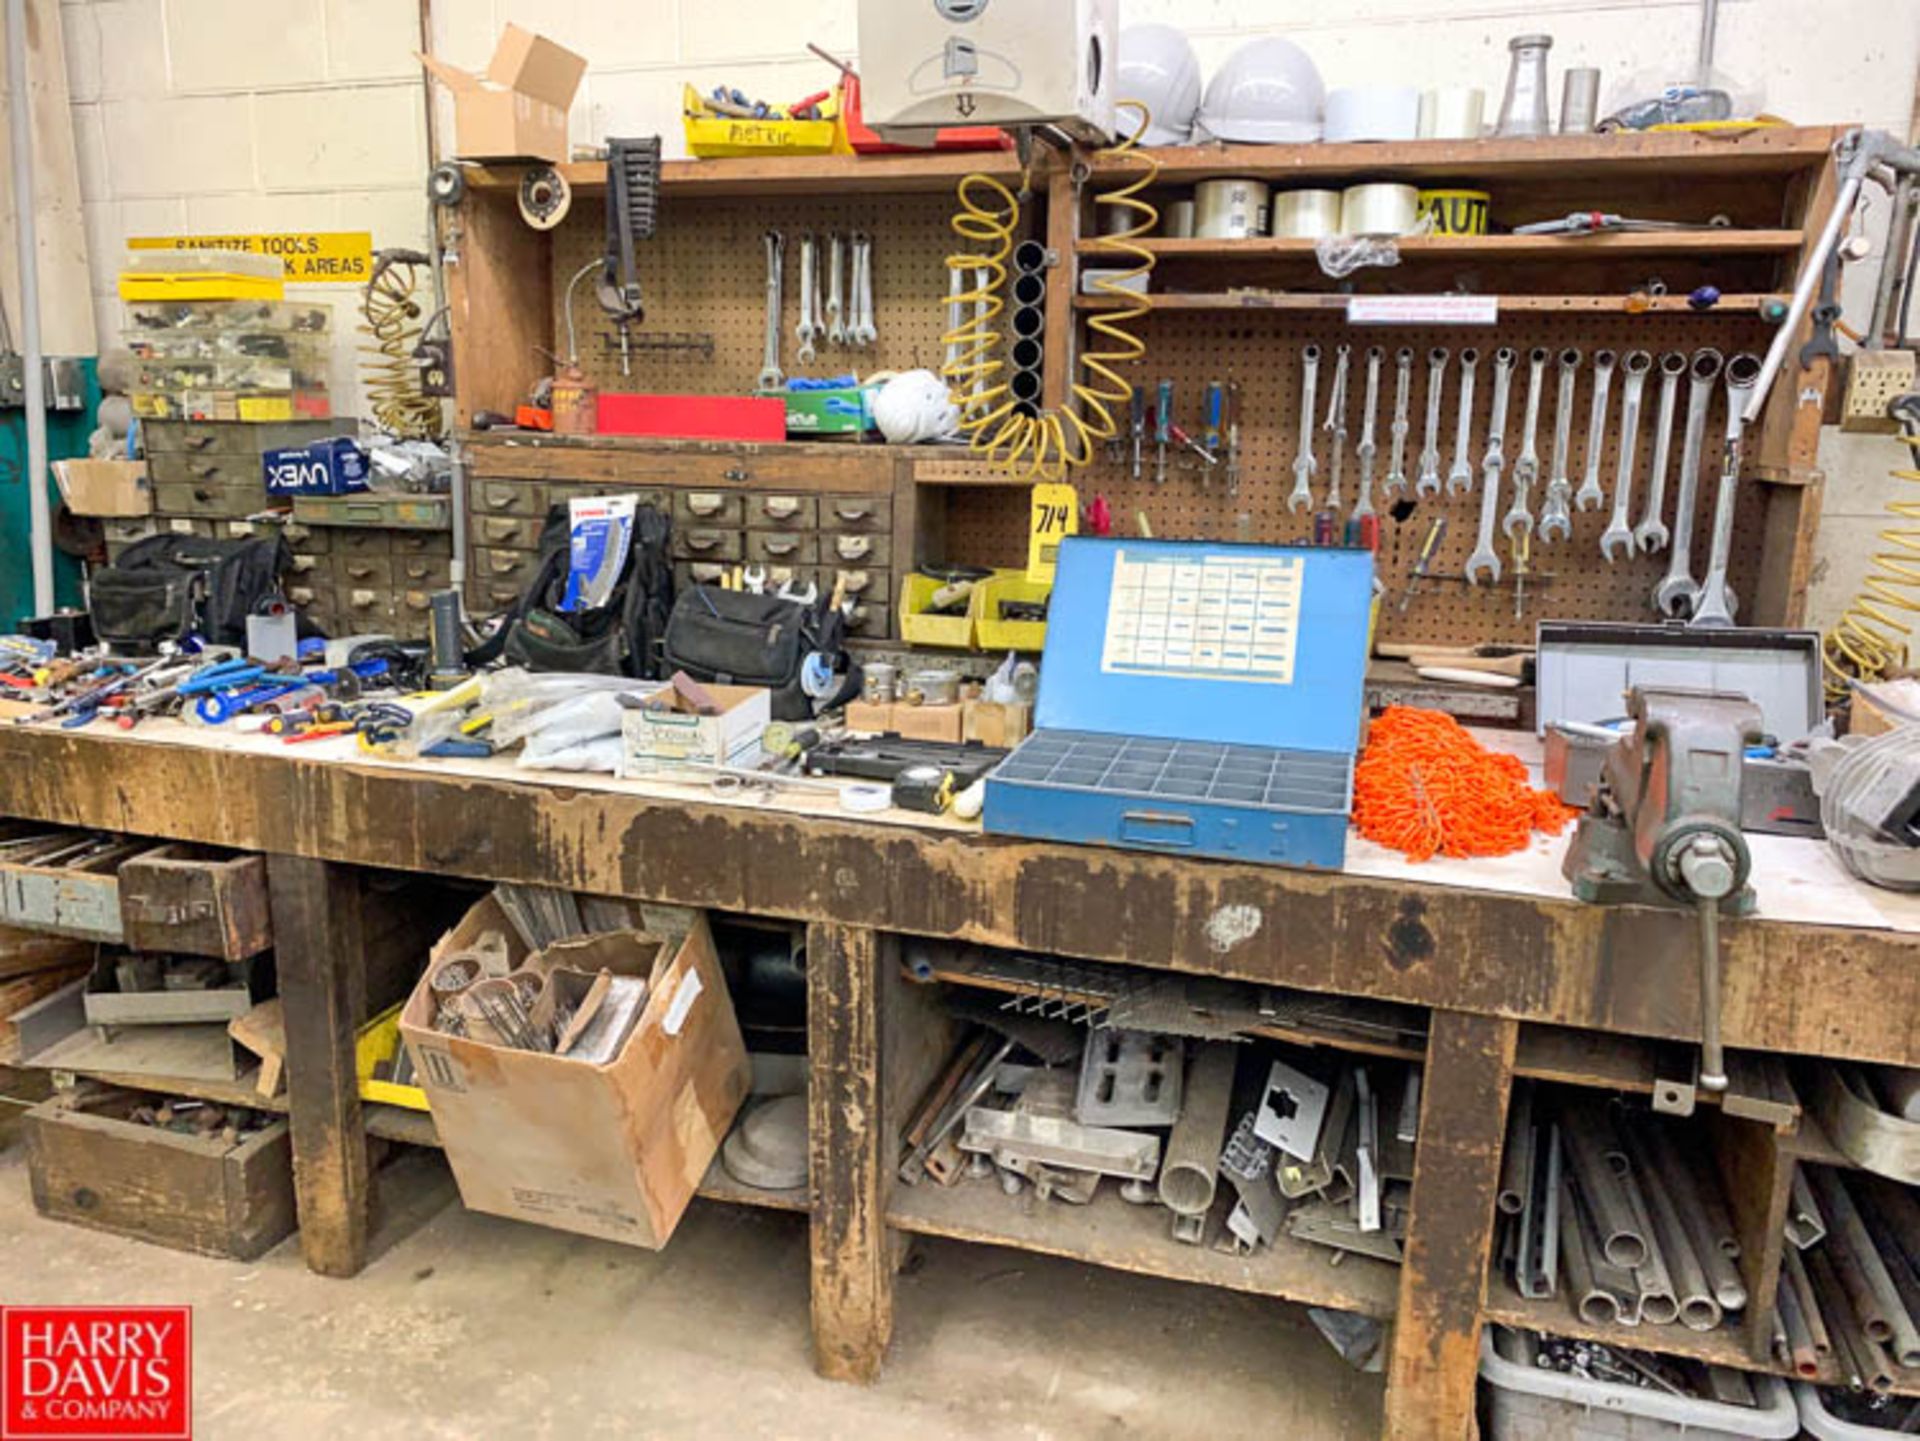 Assorted Combination Wrenches, Vice Pliers, Work Bench, Brooms, and portable Lamps - Rigging